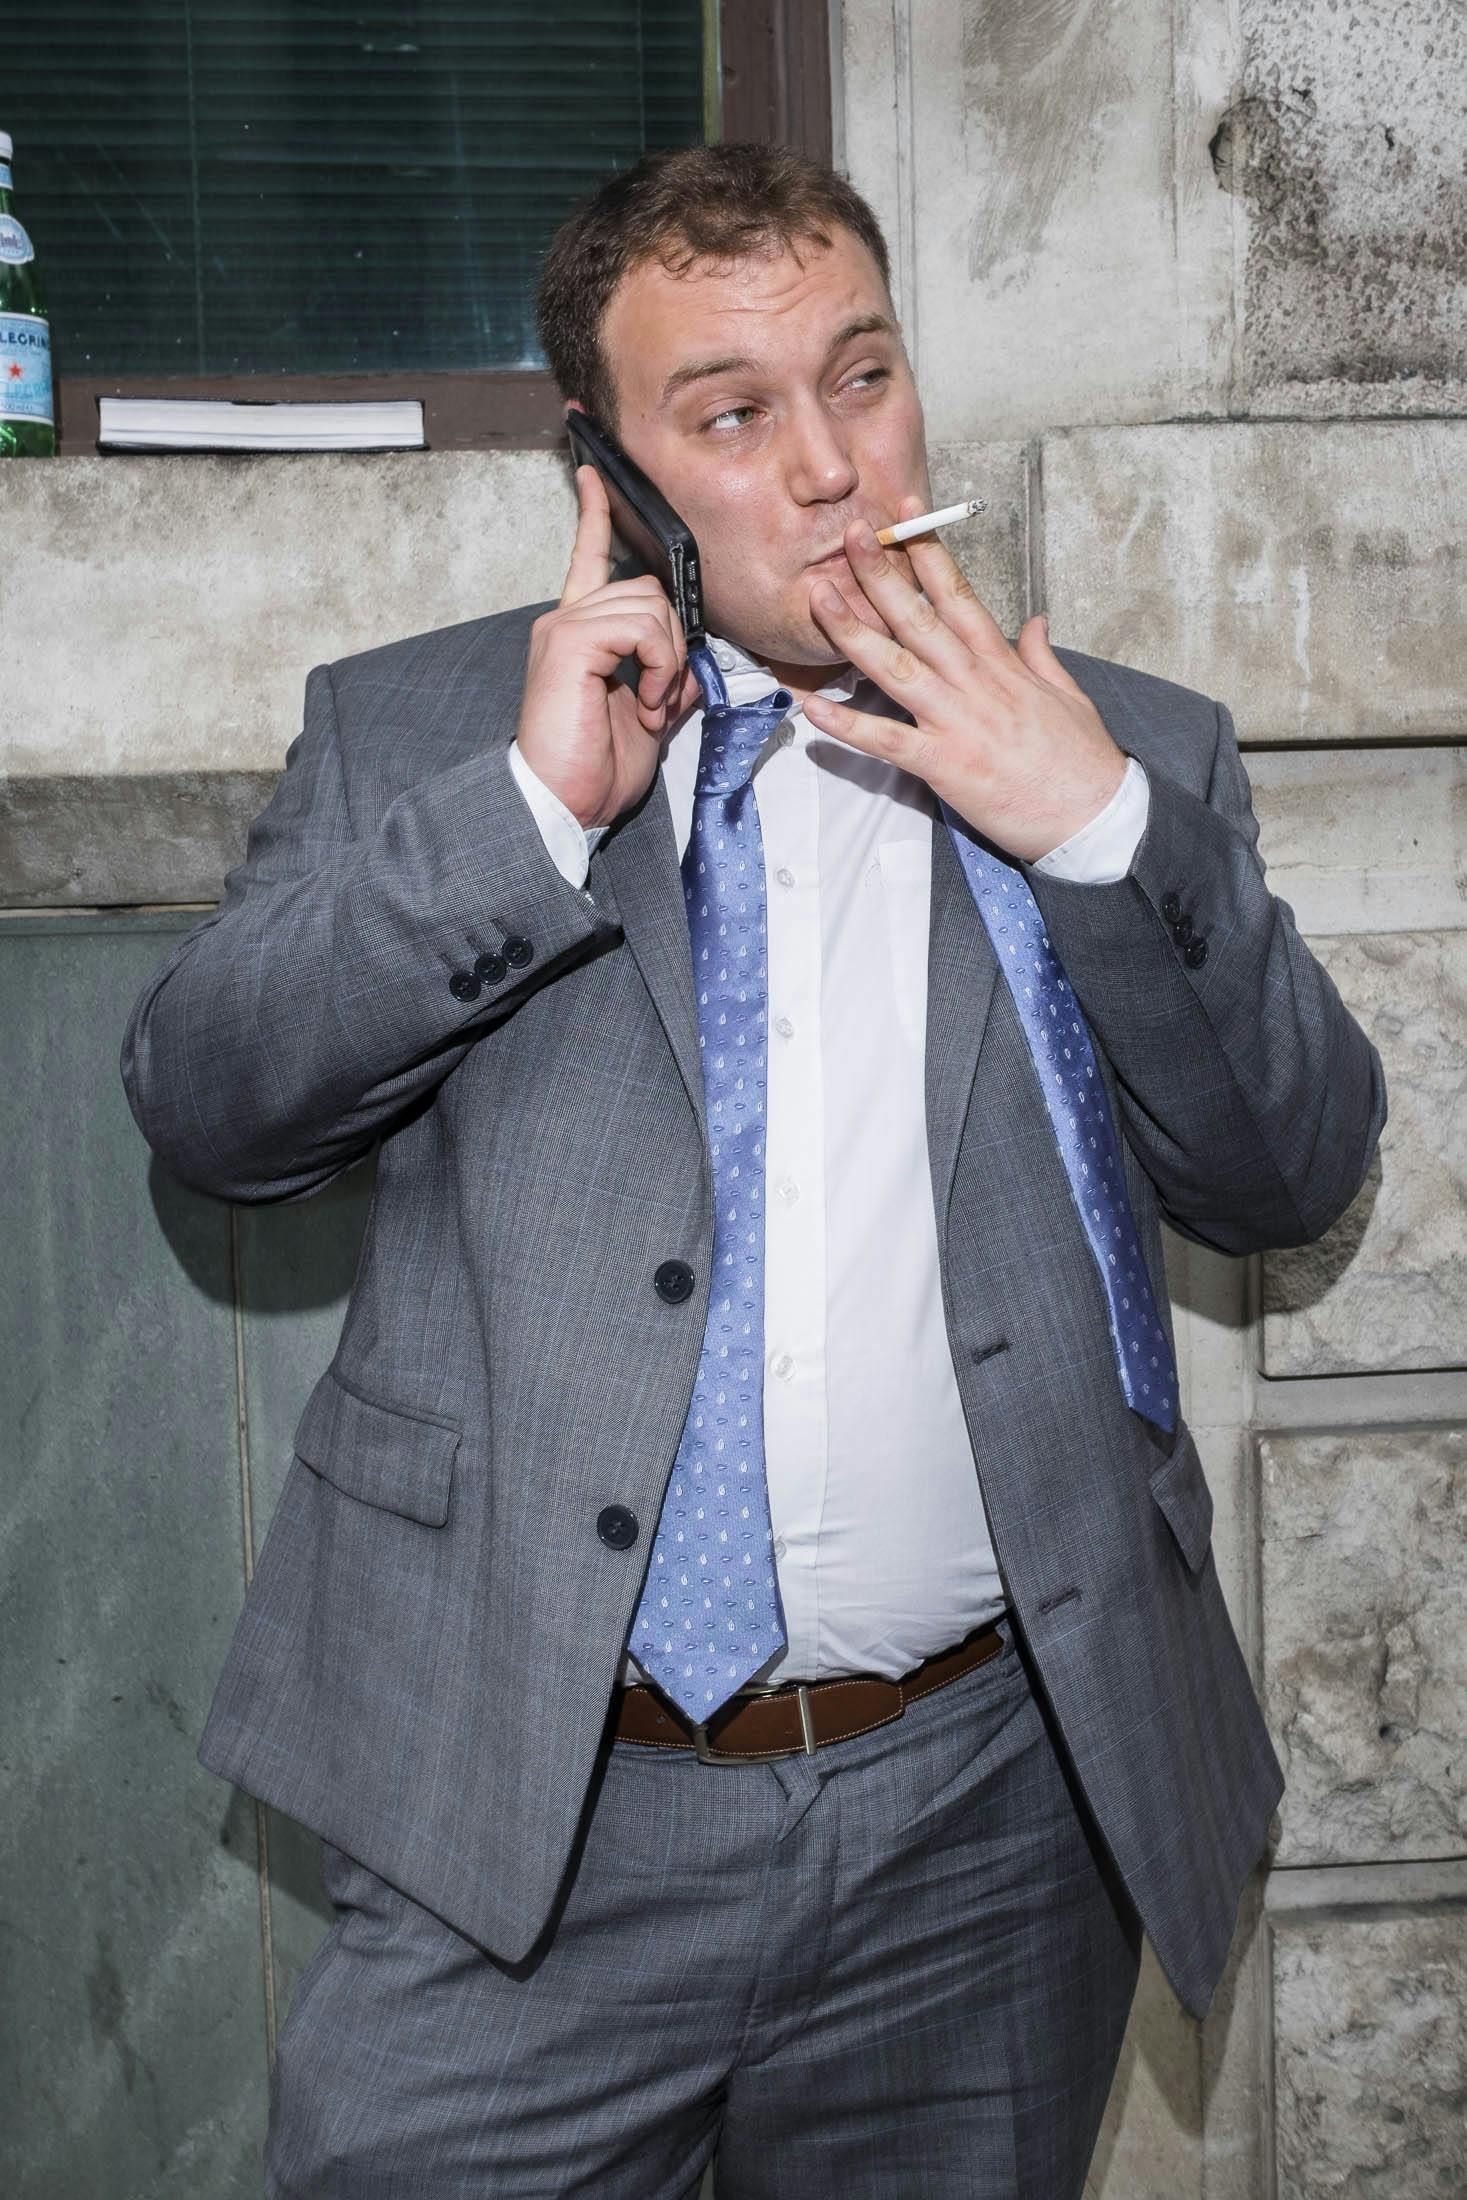 Business man smoking on the phone in grey suit.